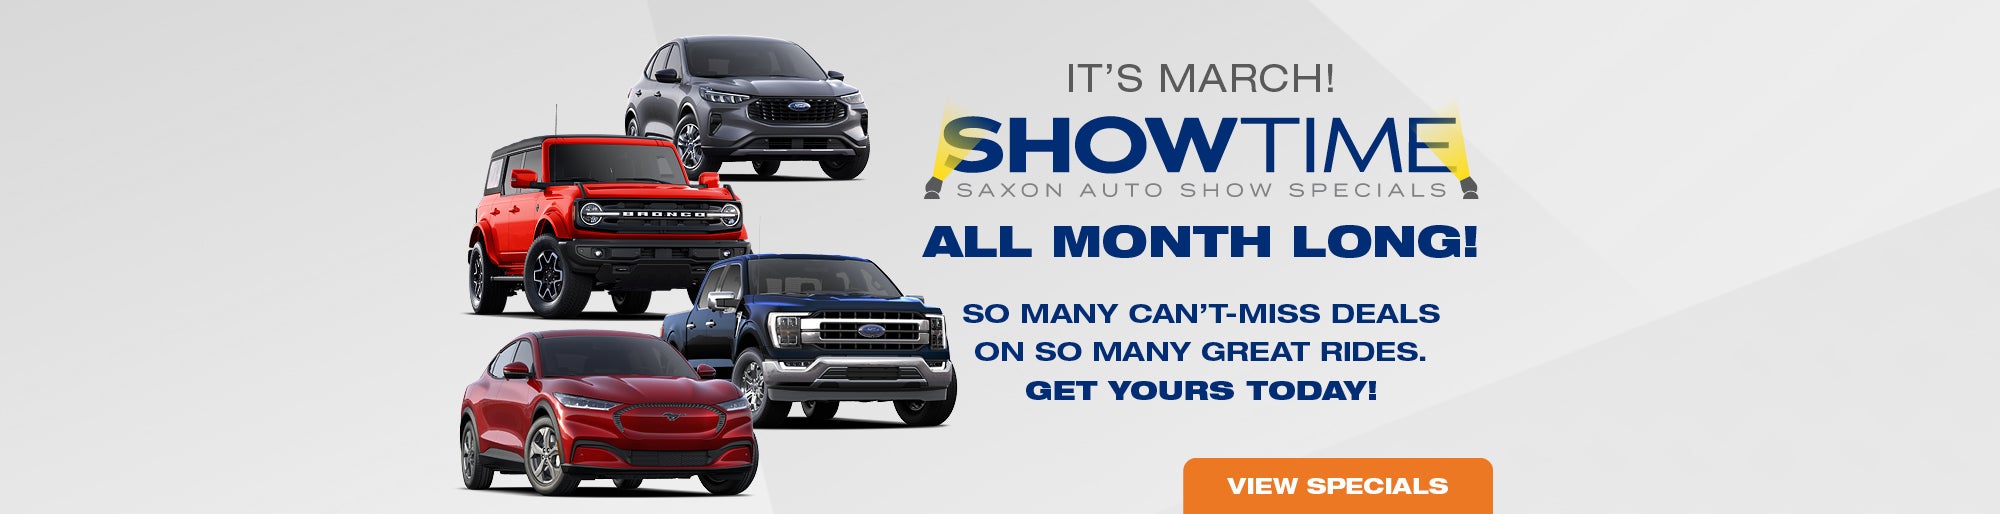 Auto Show All Month Long